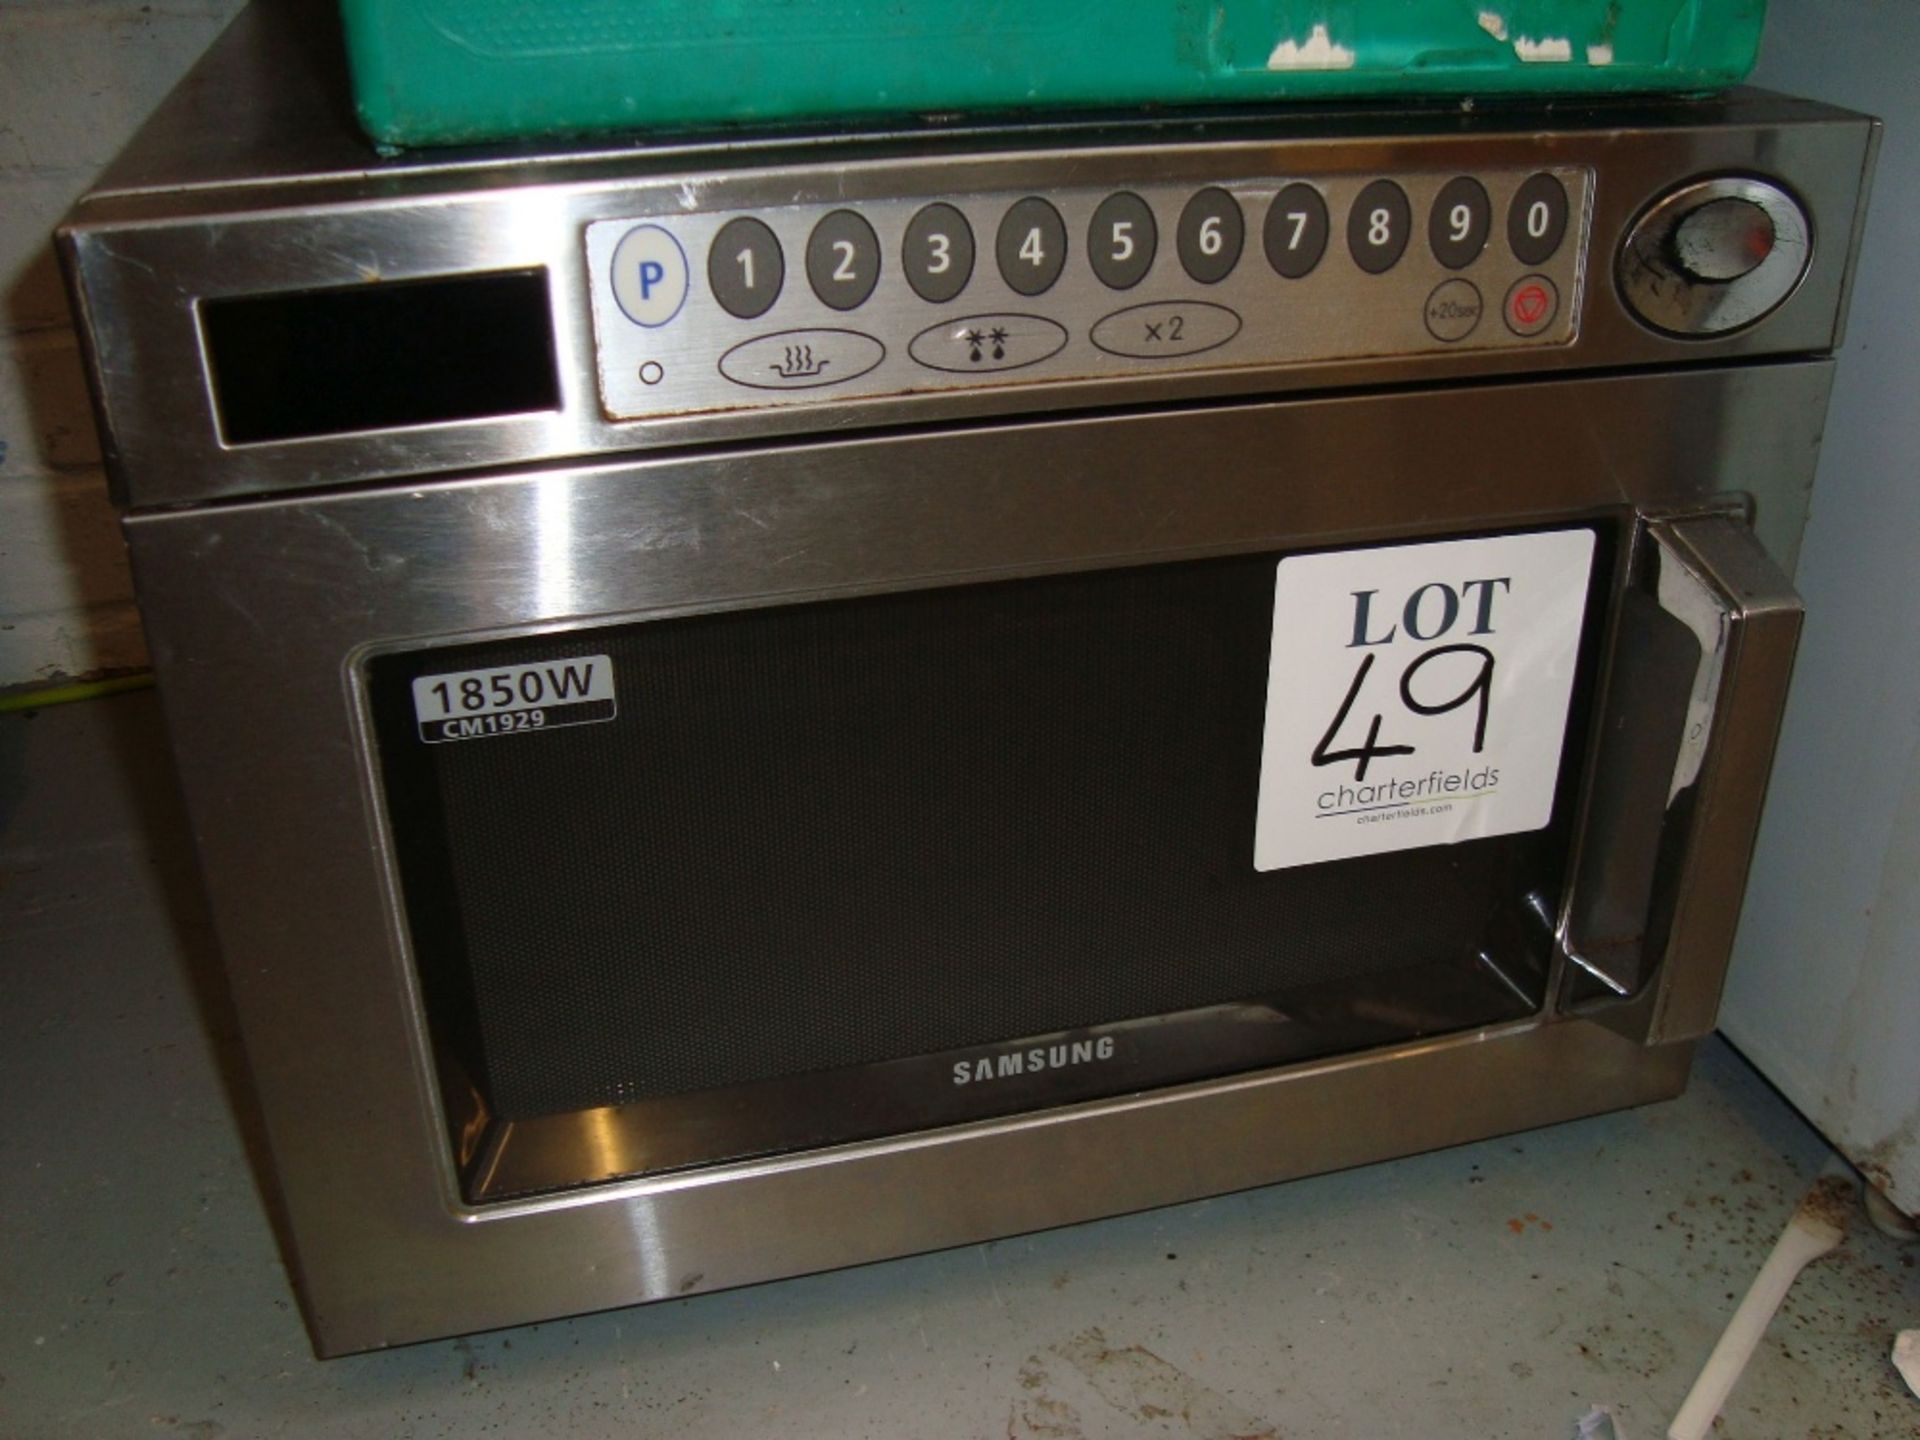 A Samsung CM1929 stainless steel microwave oven